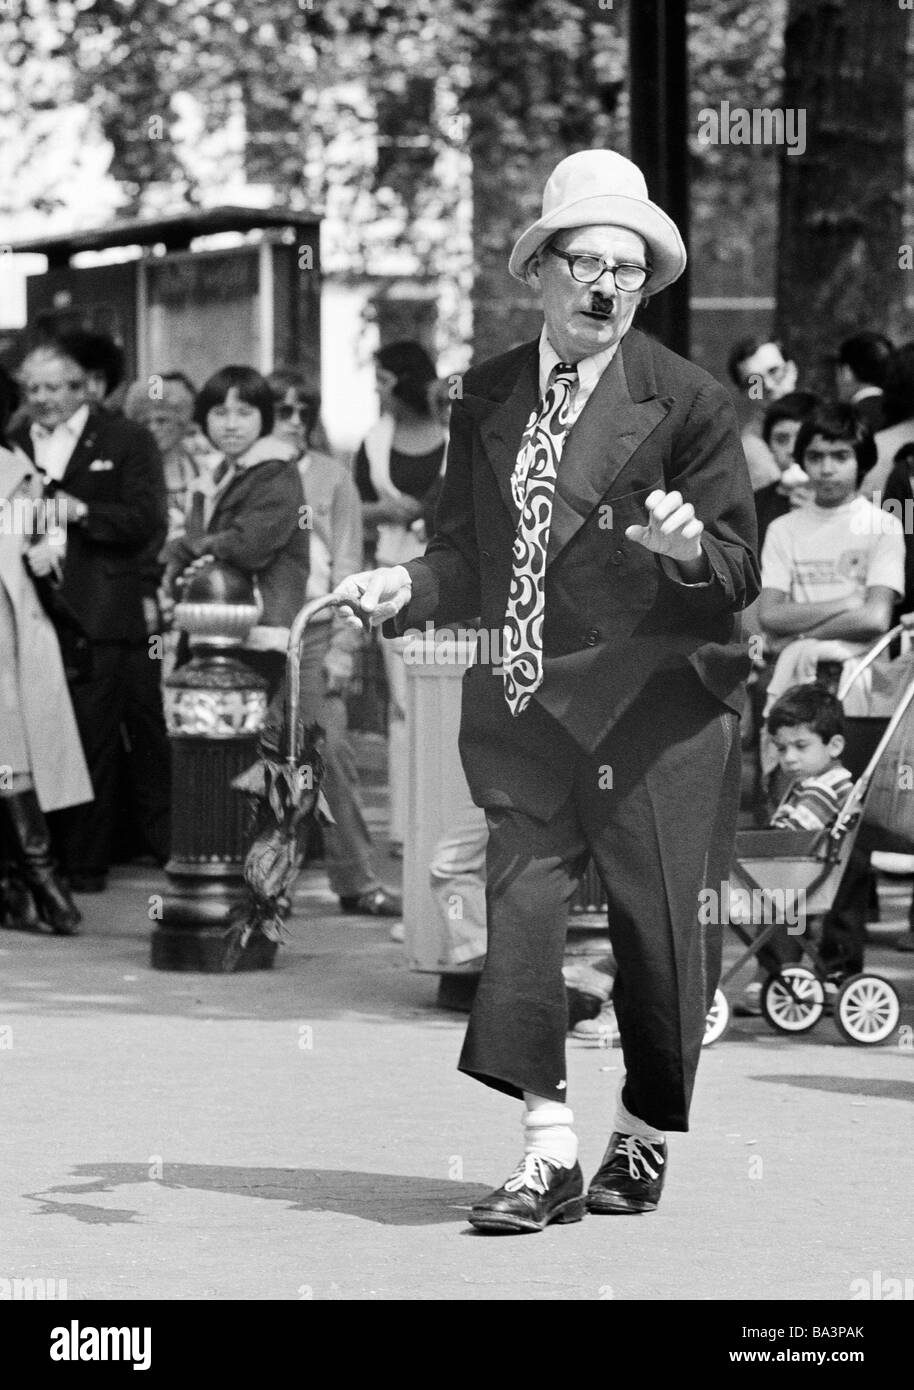 Seventies, black and white photo, humour, people, visitors on a sqare have fun with a costumed comedian, aged 60 to 70 years, Great Britain, England, London Stock Photo